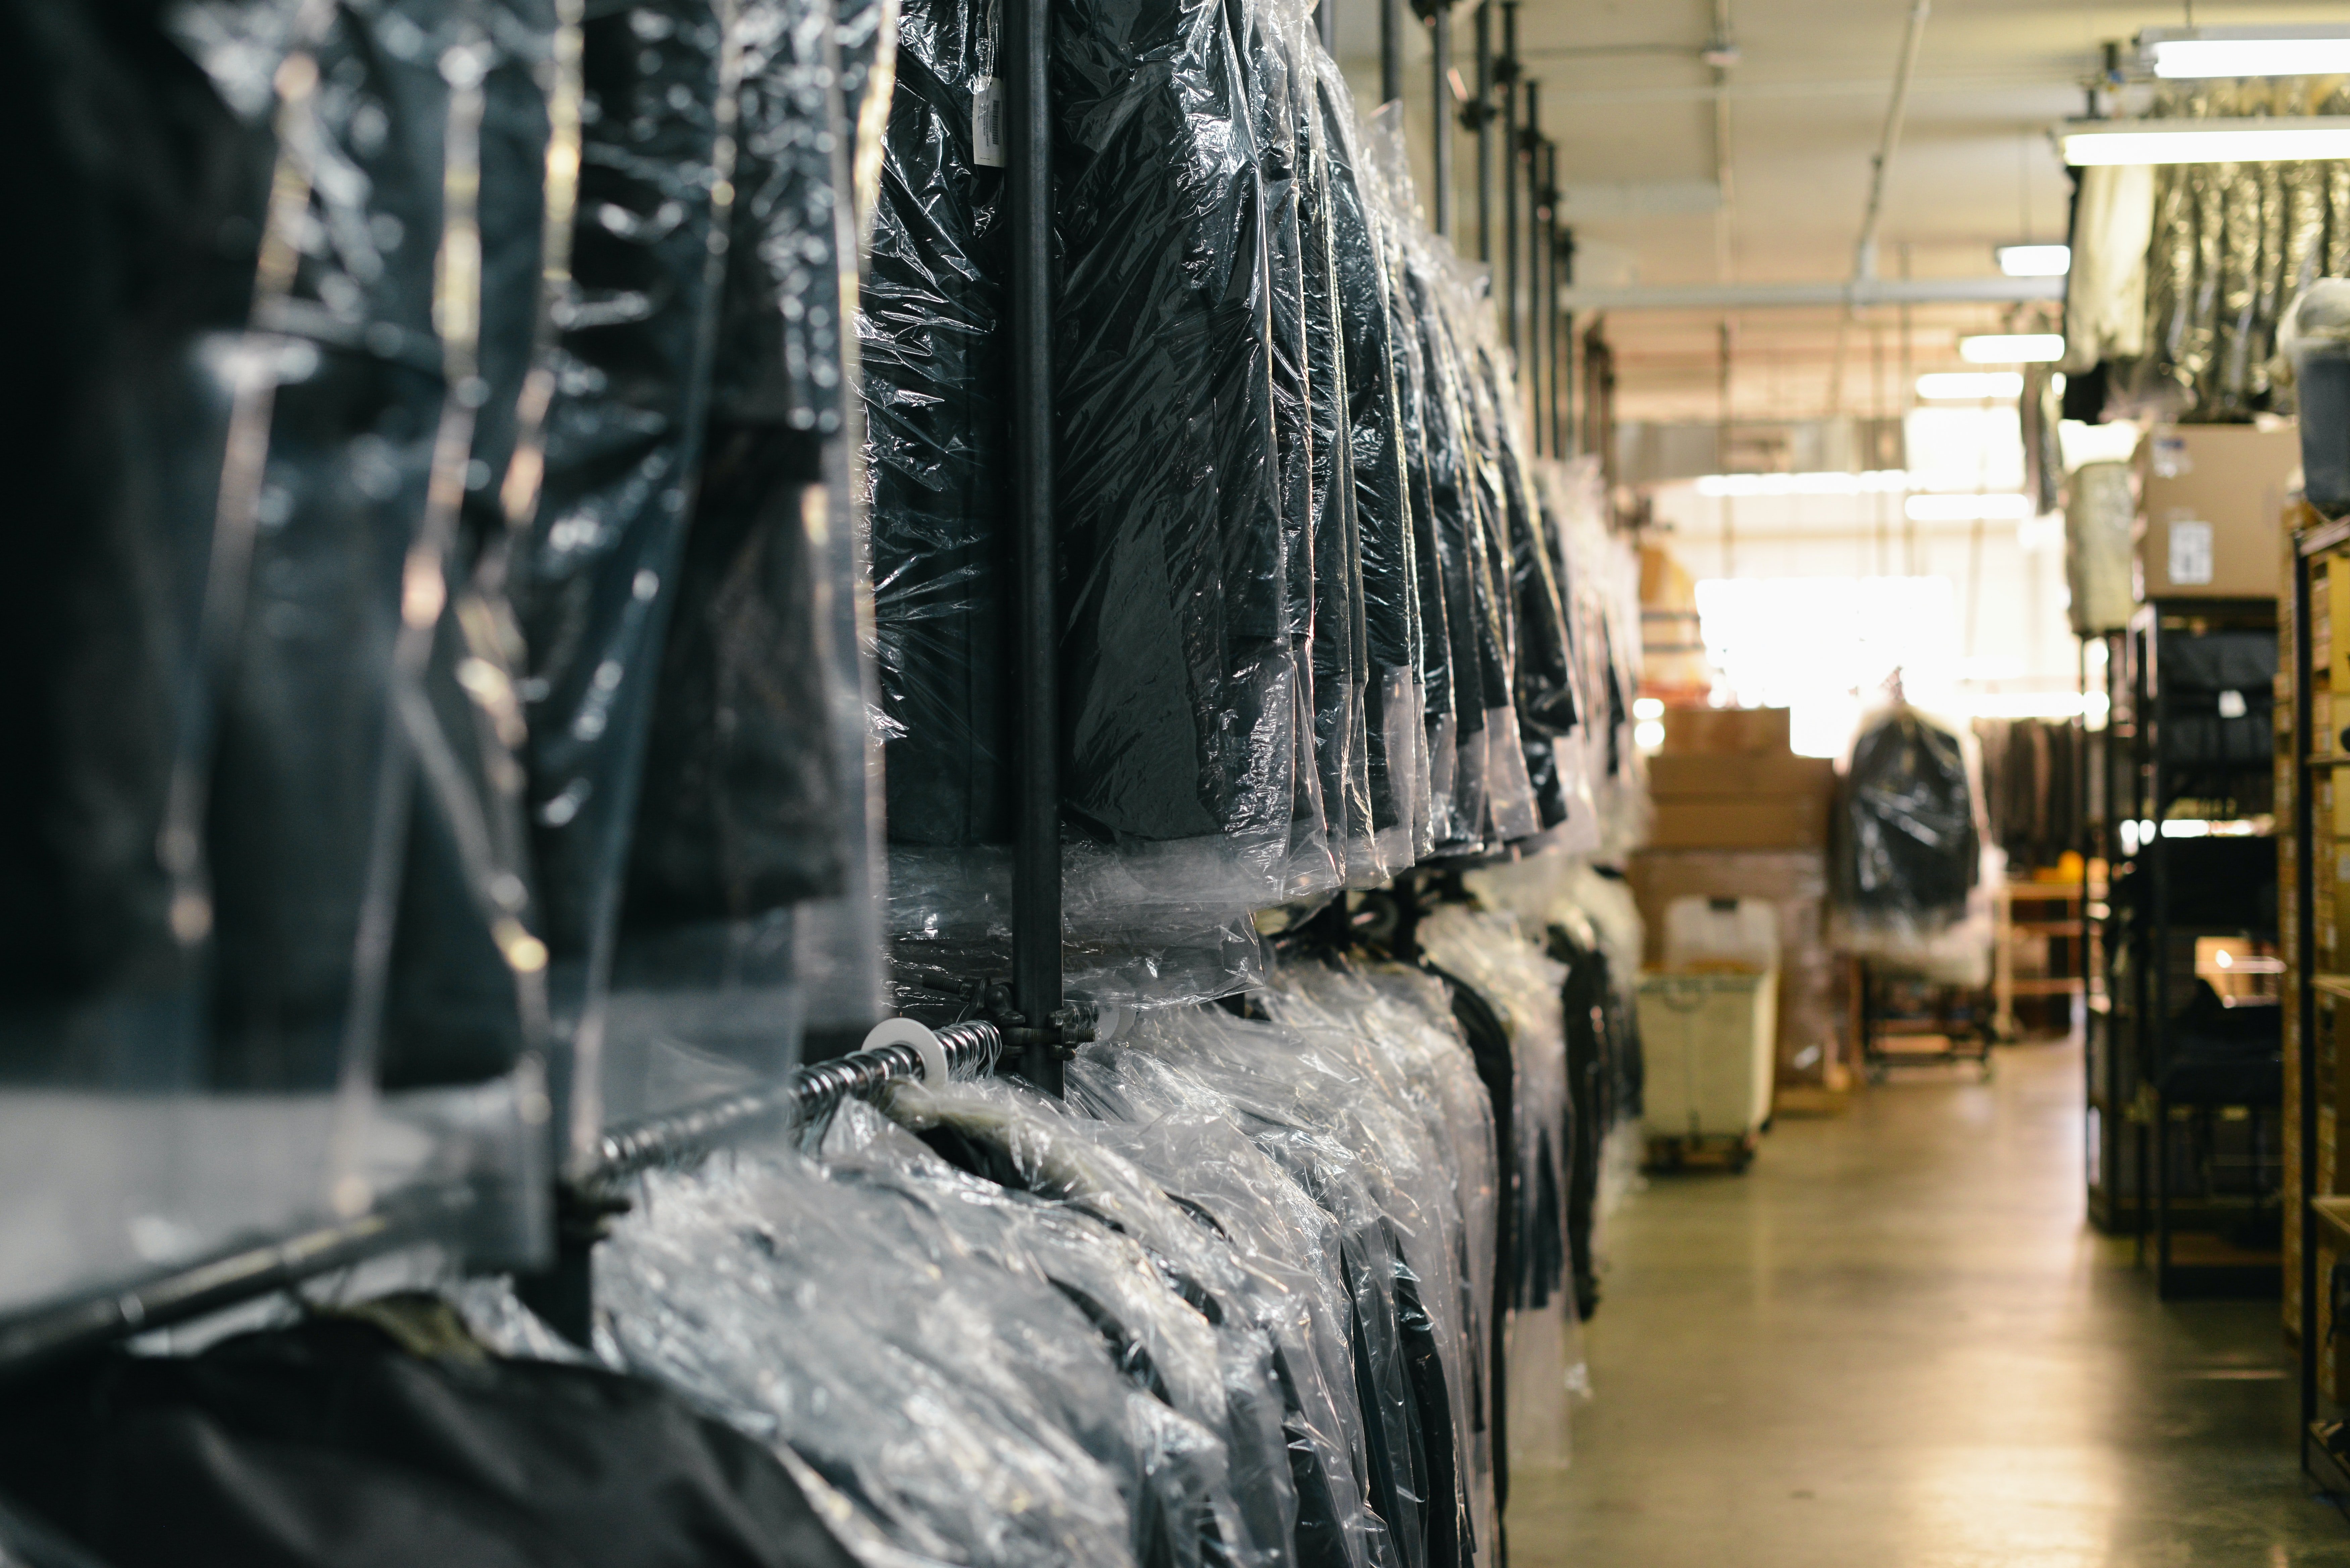 Matt and Josh accompanied Edward to the section where second-hand clothes were kept | Photo: Unsplash